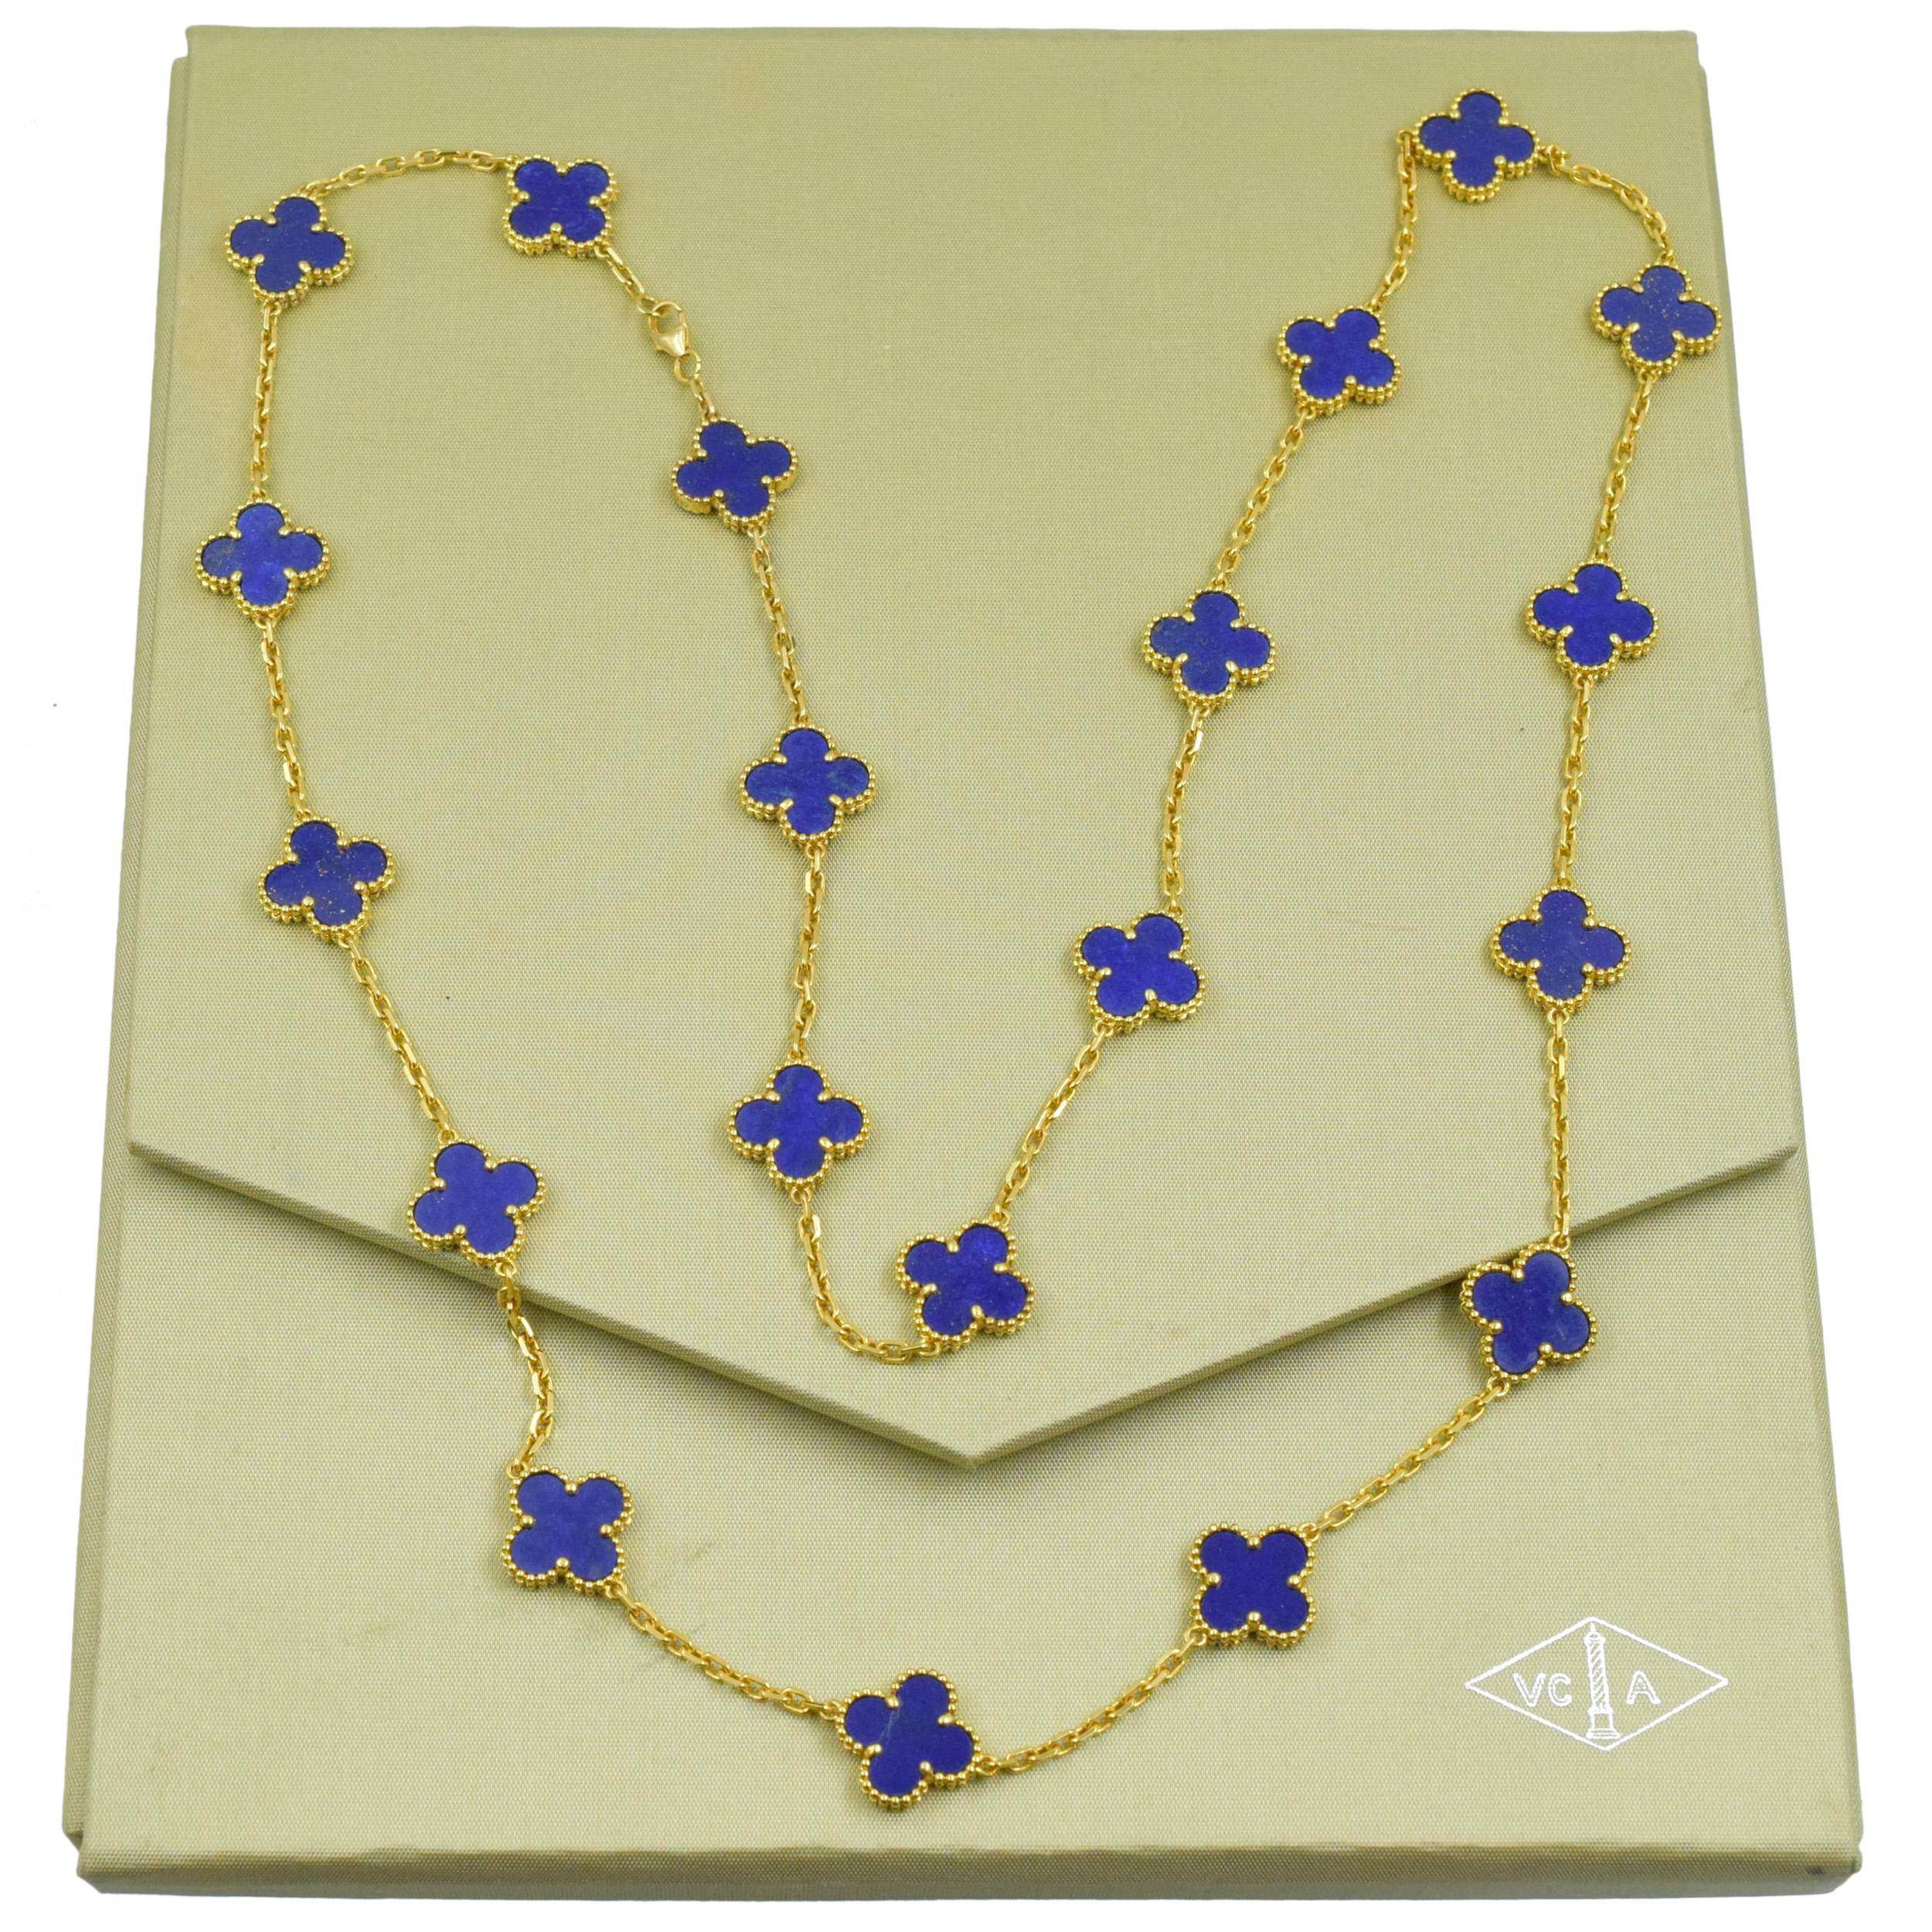 Artist VCA Lapis Lazuli Vintage Alhambra Necklace in 18k yellow gold. For Sale